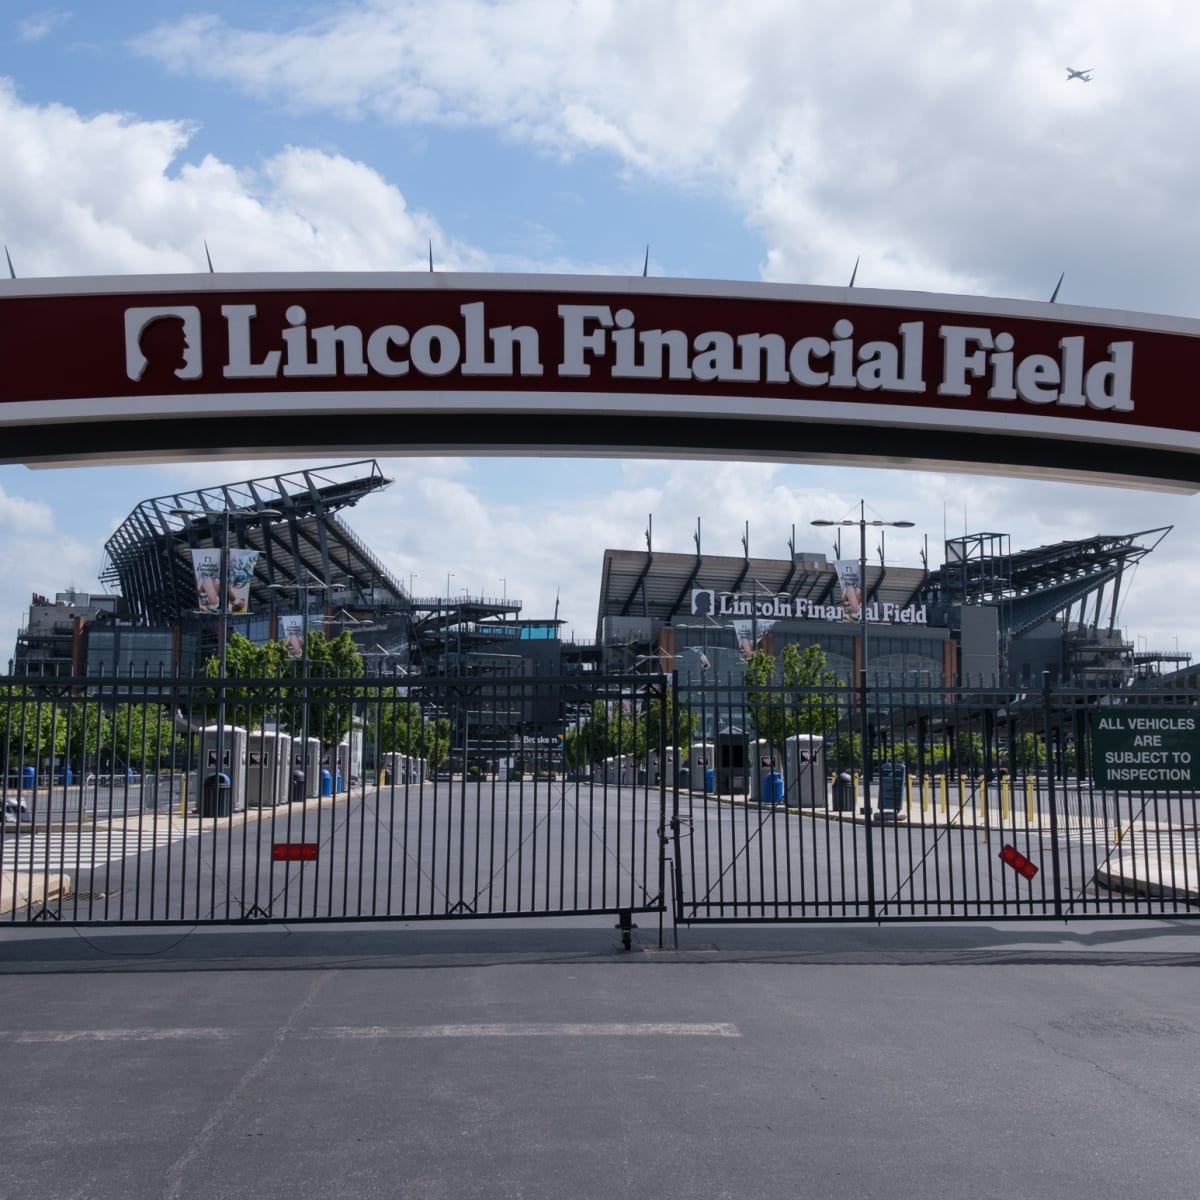 Philadelphia eases coronavirus restrictions on crowds, allowing Eagles fans  at Lincoln Financial Field